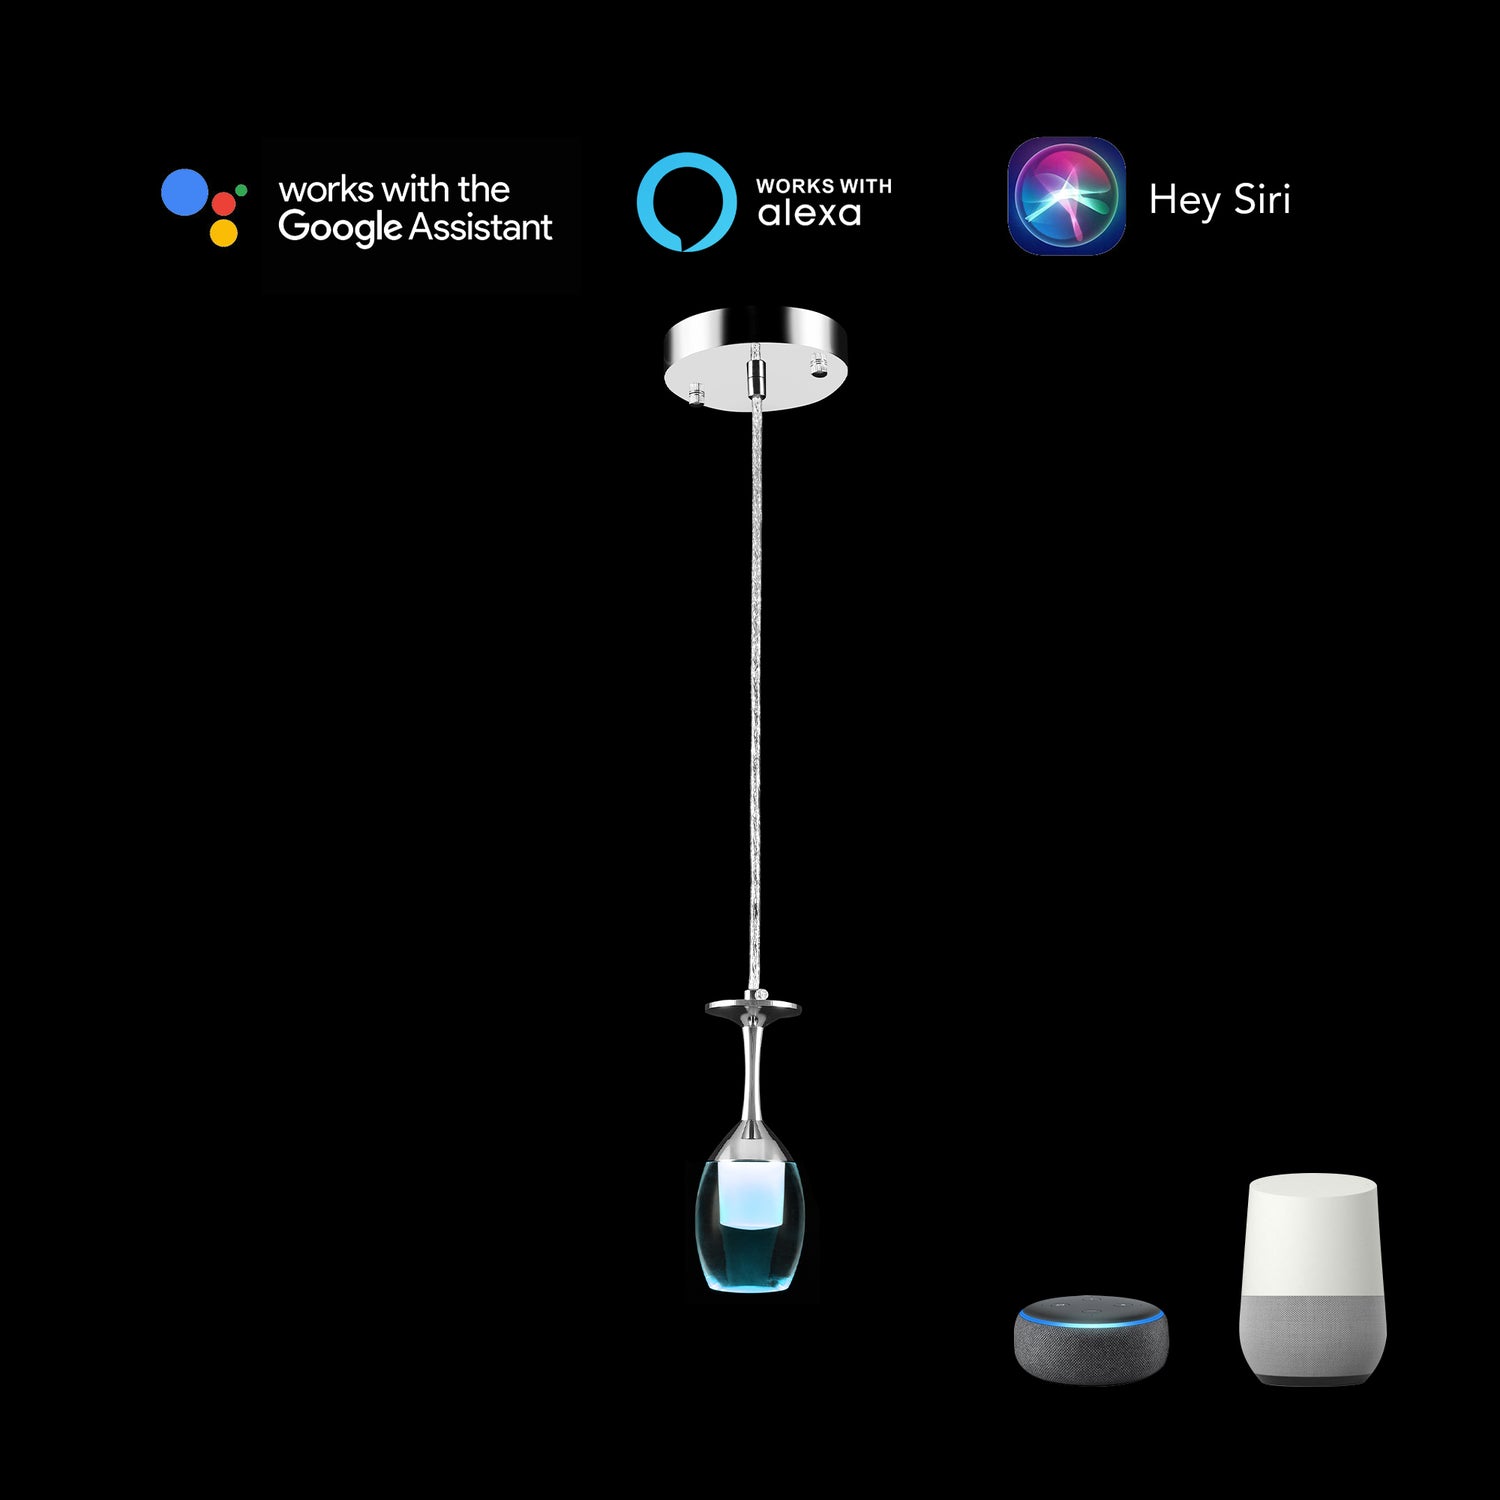 It brings fun light that can be used in every occasion. The pendant light features Wi-Fi apps, Siri Shortcut and Voice control technology (compatible with Amazon Alexa and Google Home Assistant) to set the pendant light dimmable and RGB multicolor. This pendant light can satisfy not only the various color lighting effect settings, but also the more dim color variations that slowly change. The light colors are vivid and bright and dimmable. 